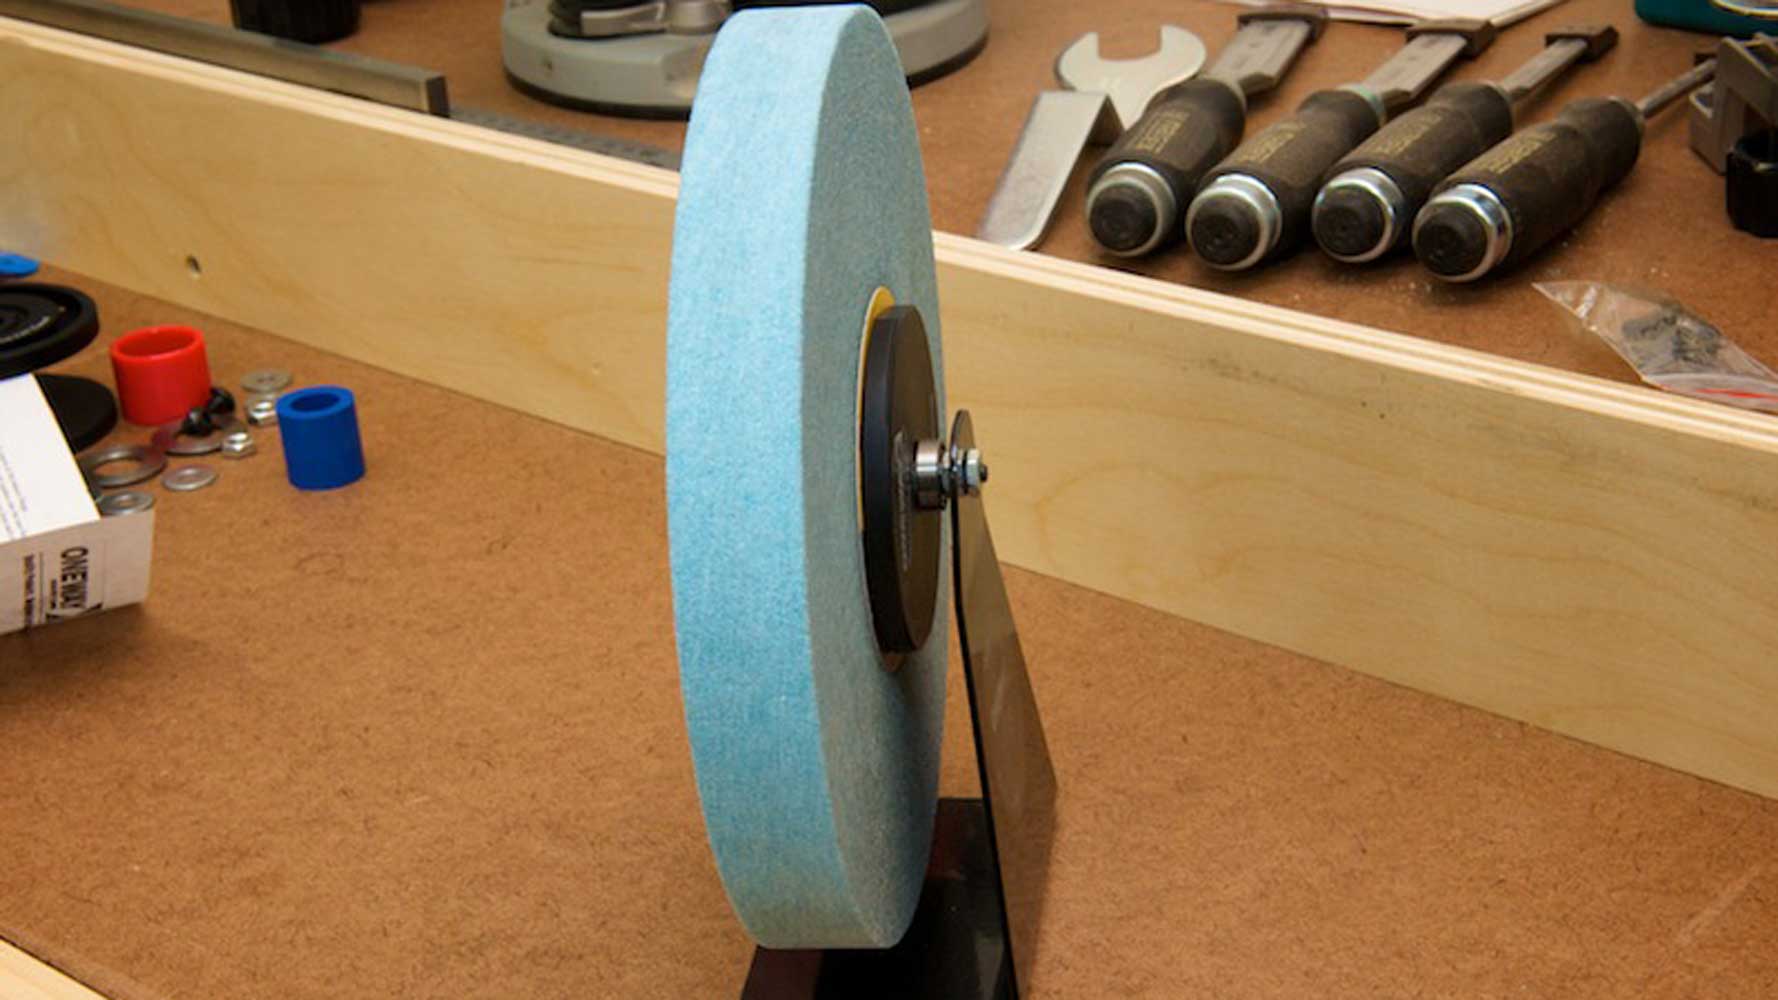 balance the equalizer bar of the grinding wheel